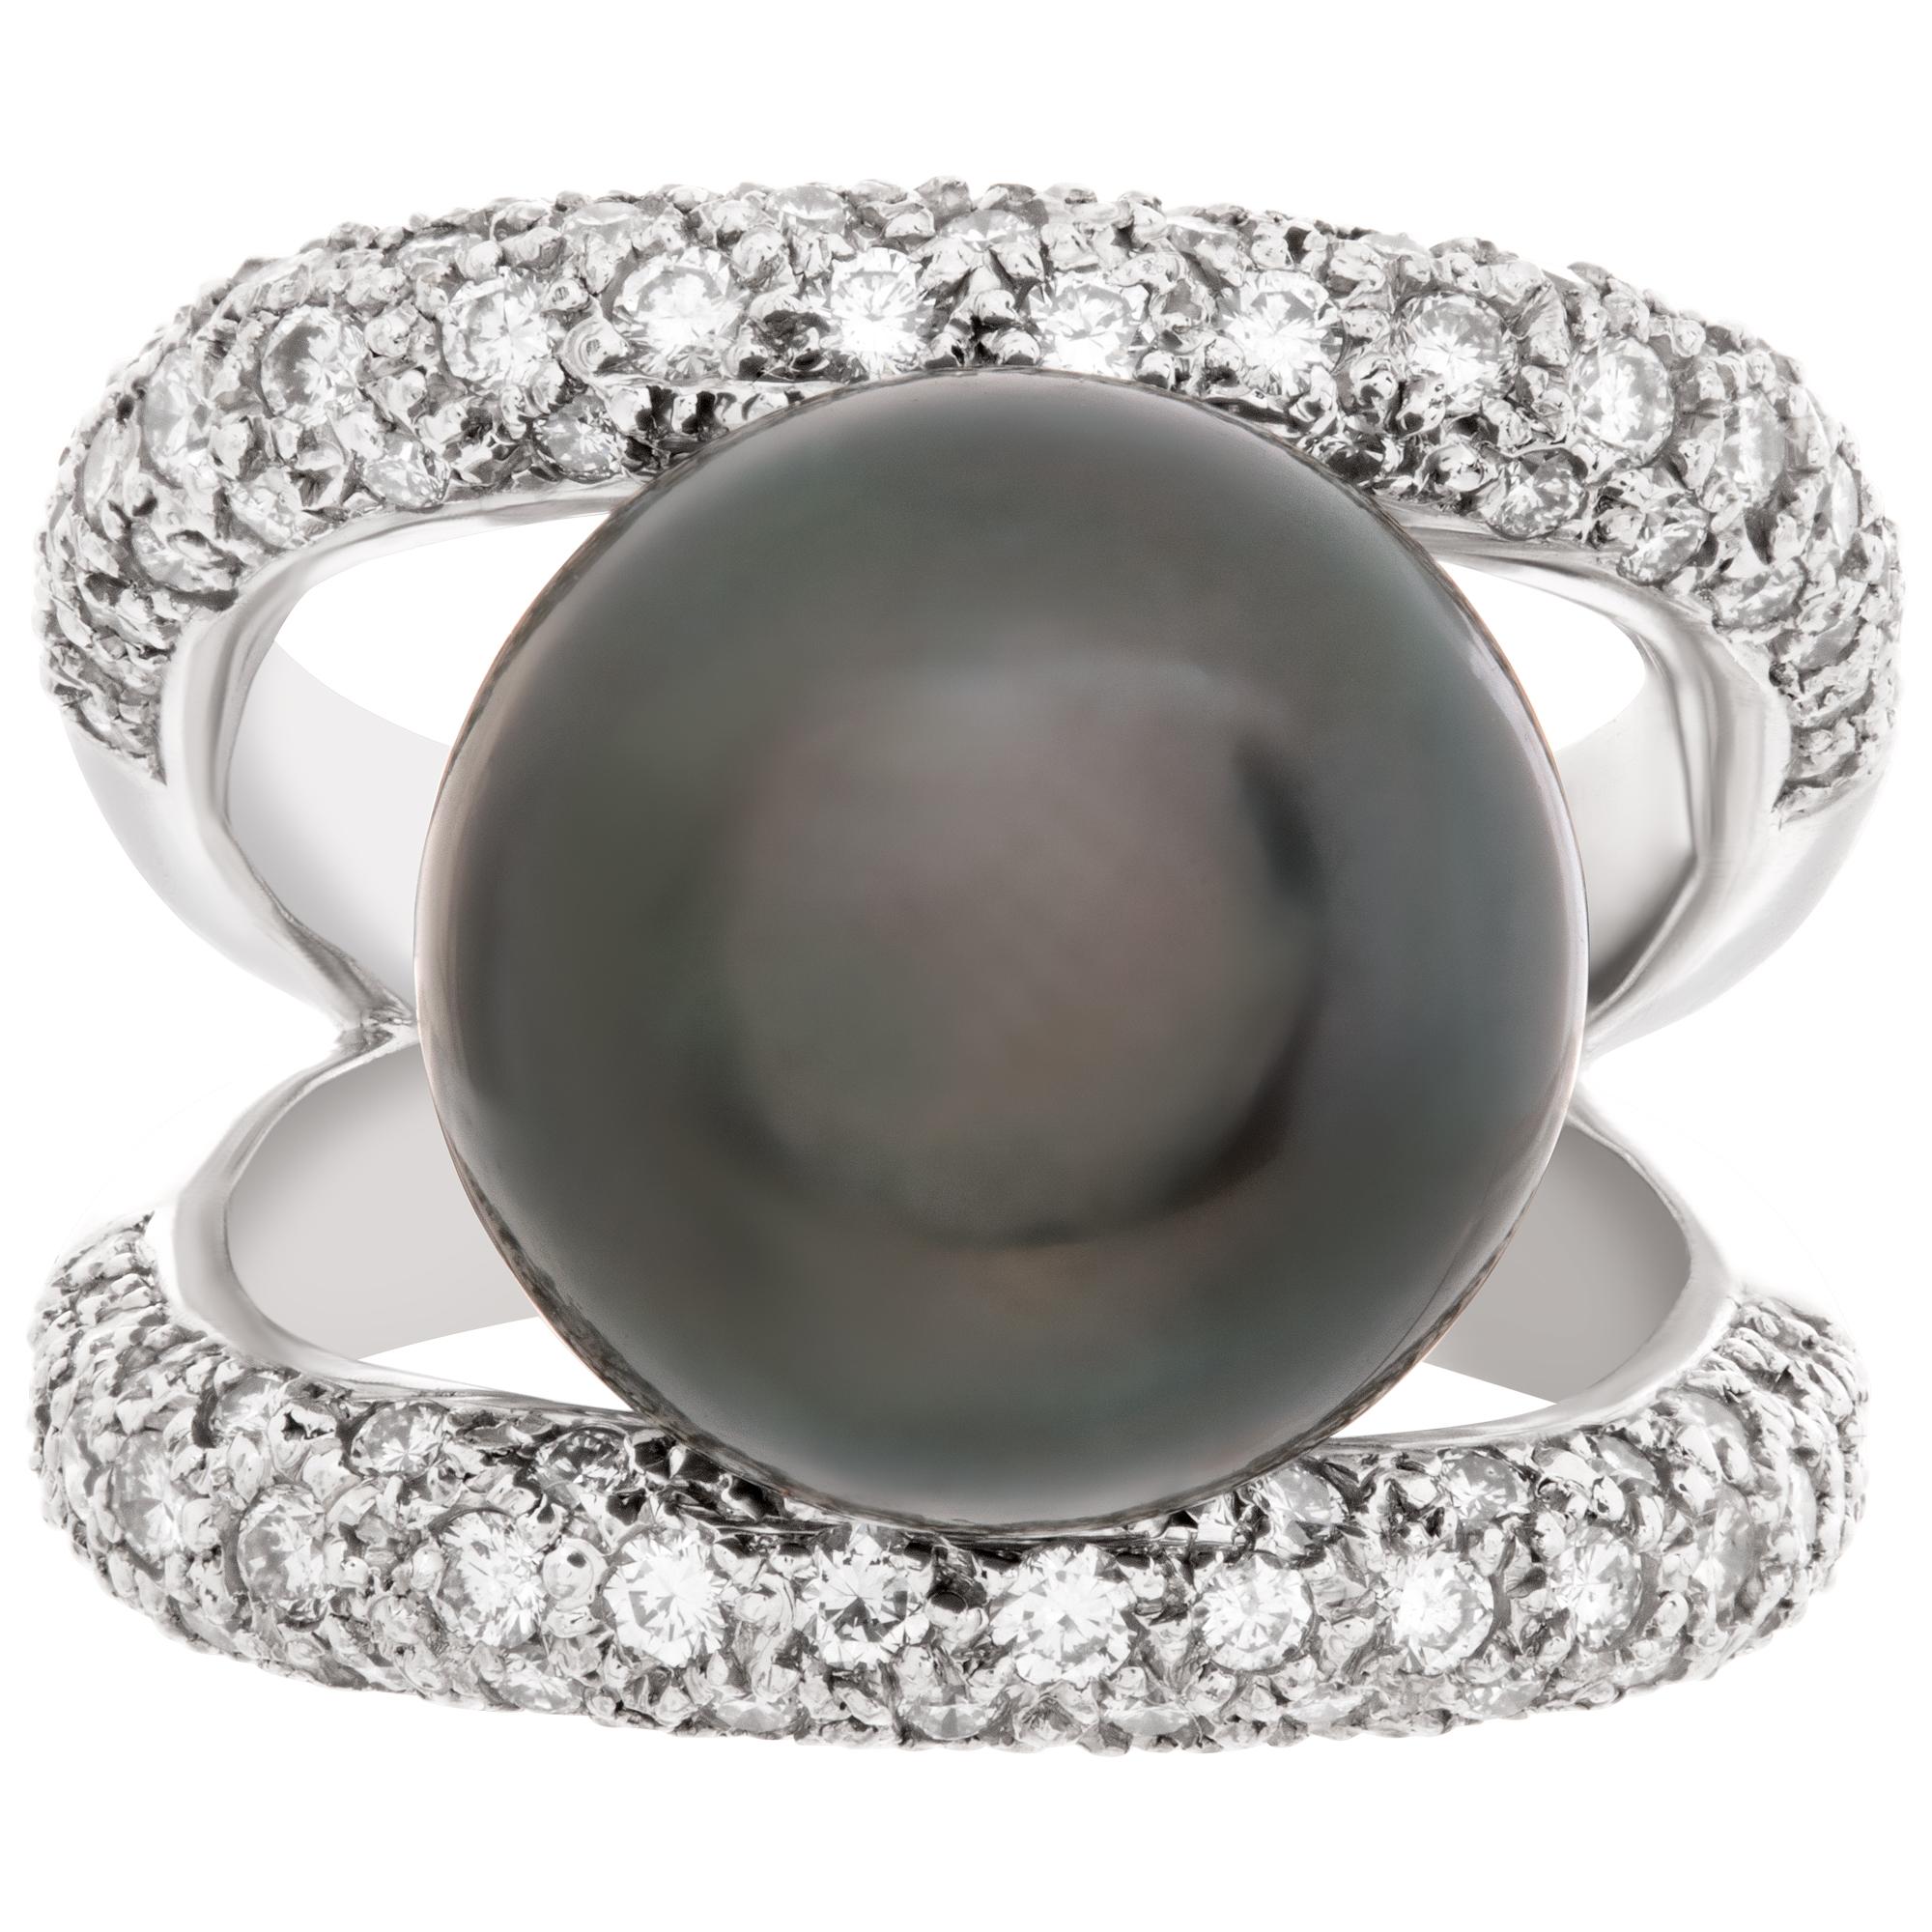 Tahitian pearl (15 x15.5mm) and 3.00 carats diamonds ring in 18k white gold. Brilliant cut diamond total approx. weight: 3.00 carats, estimate G-H color, VS clarity. Front height: 20mm (1 3/4